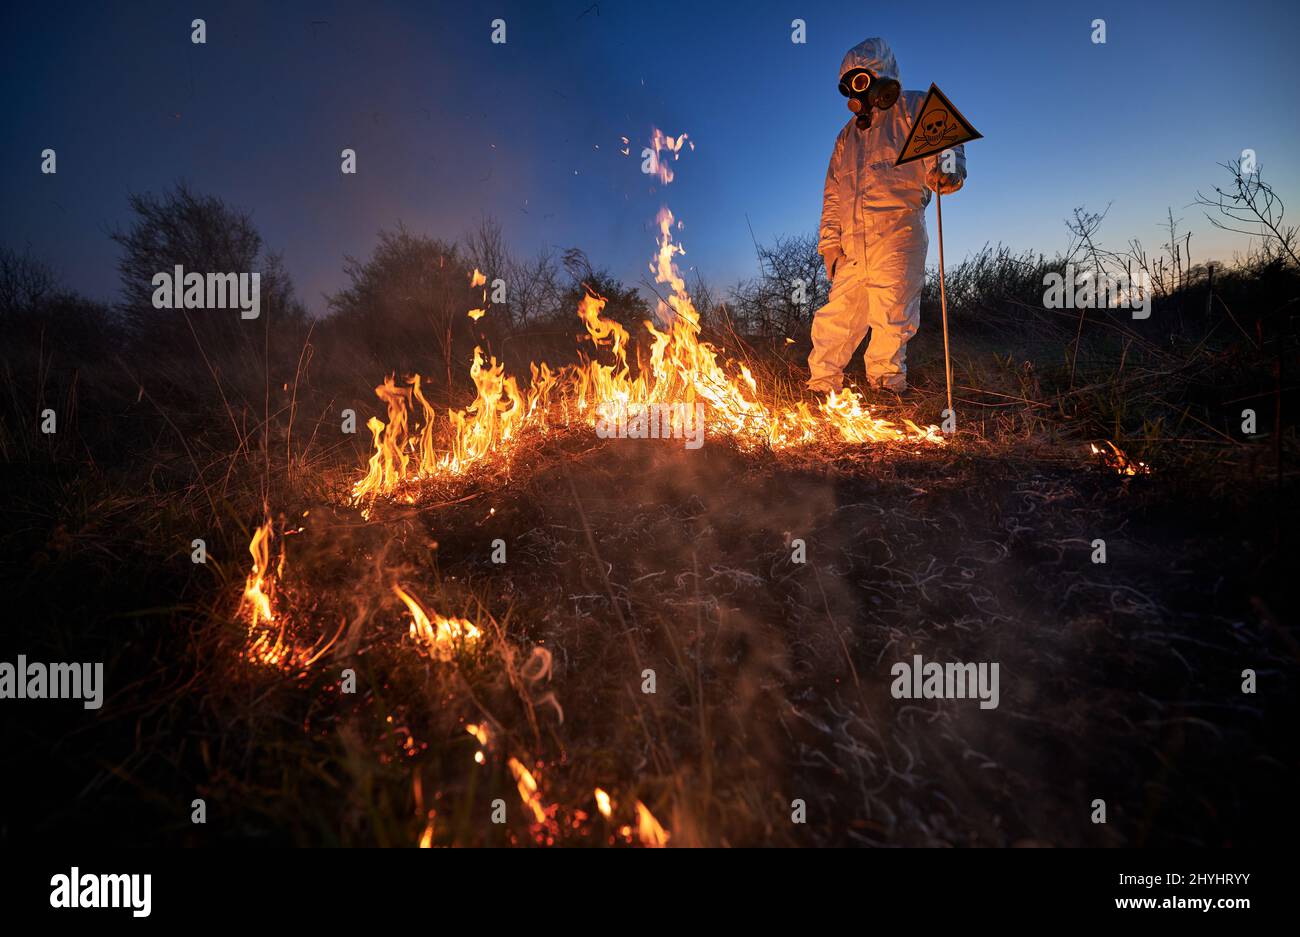 Firefighter ecologist extinguishing fire in field at night. Man in protective suit and gas mask near burning grass with smoke, holding warning sign with skull and crossbones. Natural disaster concept. Stock Photo